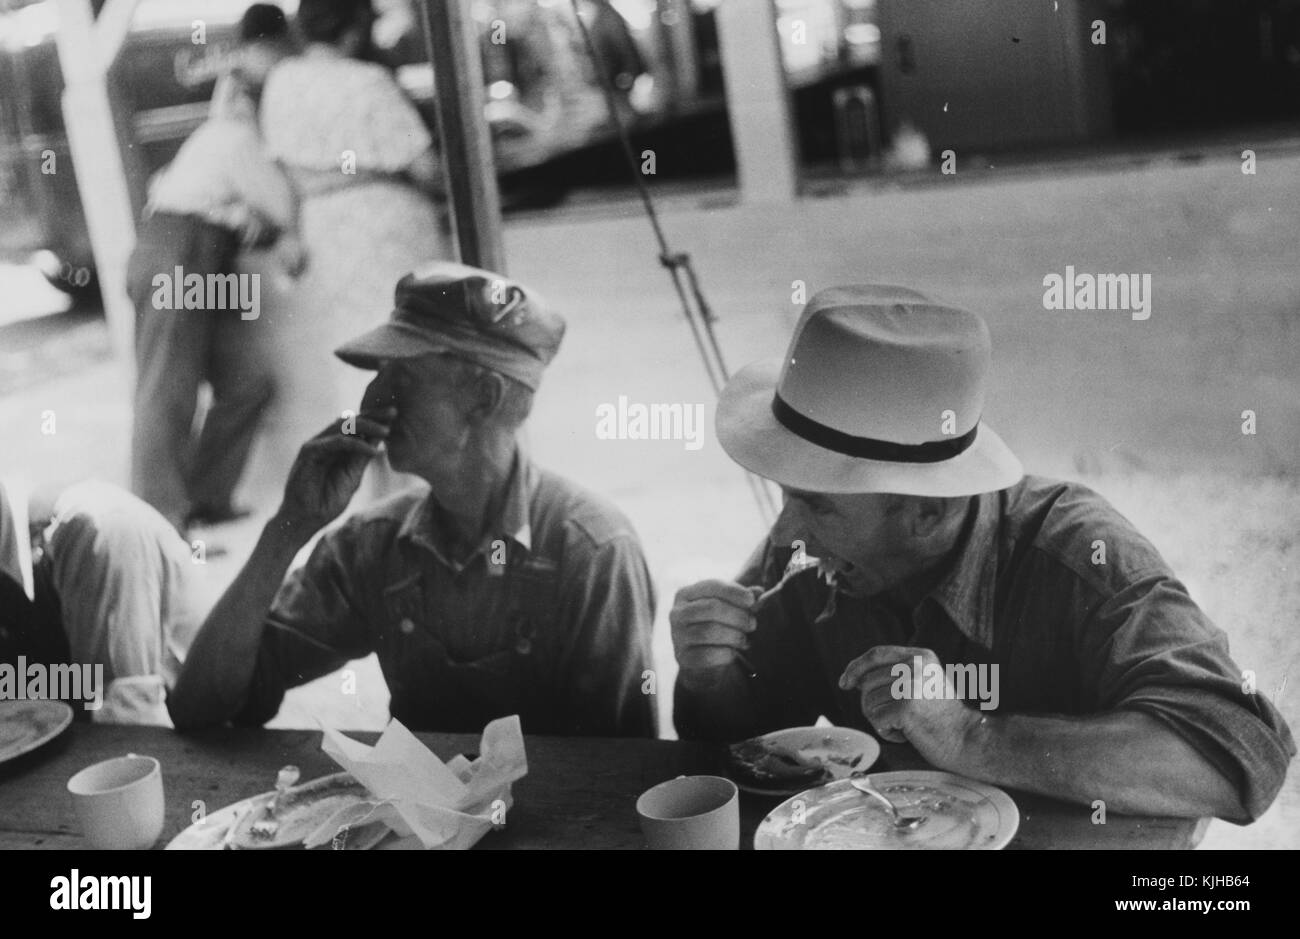 Black and white photograph of spectators at a county fair, eating lunch, by Ben Shahn, Lithuanian born, American artist known for his work for the Farm Security Administration documenting the effects of the Great Depression, Ohio, 1938. From the New York Public Library. Stock Photo